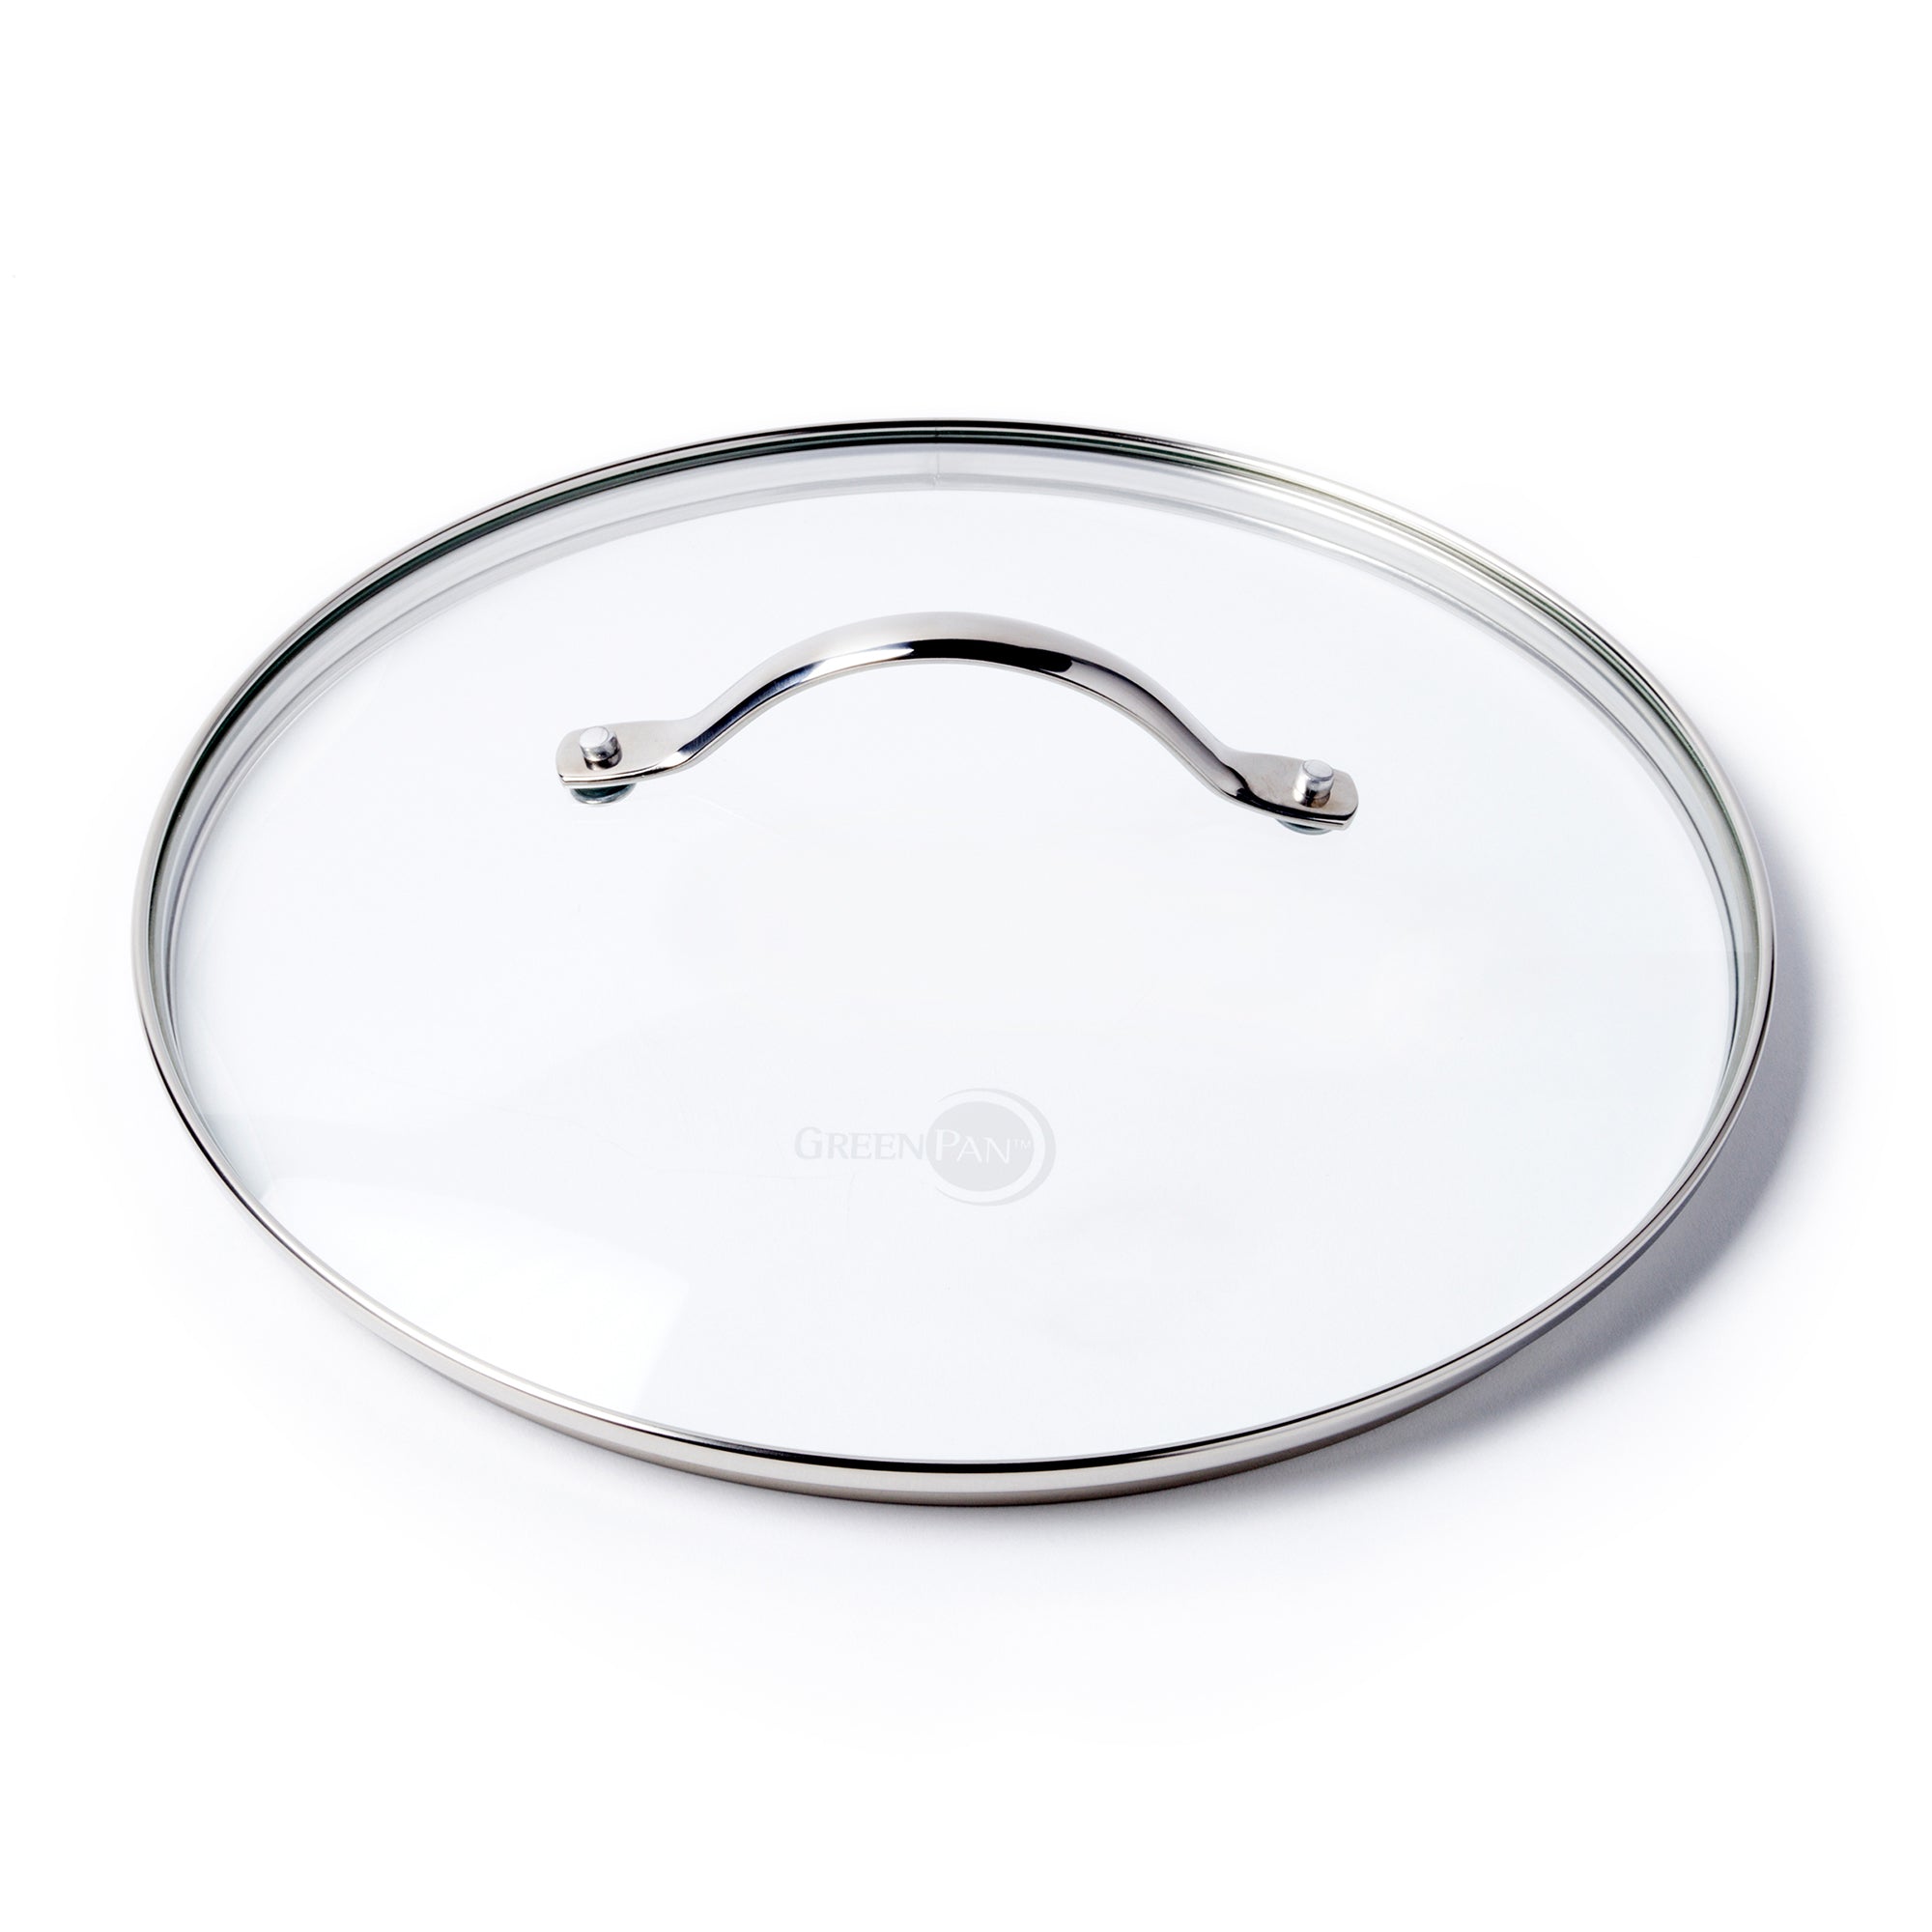 GreenPan Glass Lid with Stainless Steel Handle, 20cm